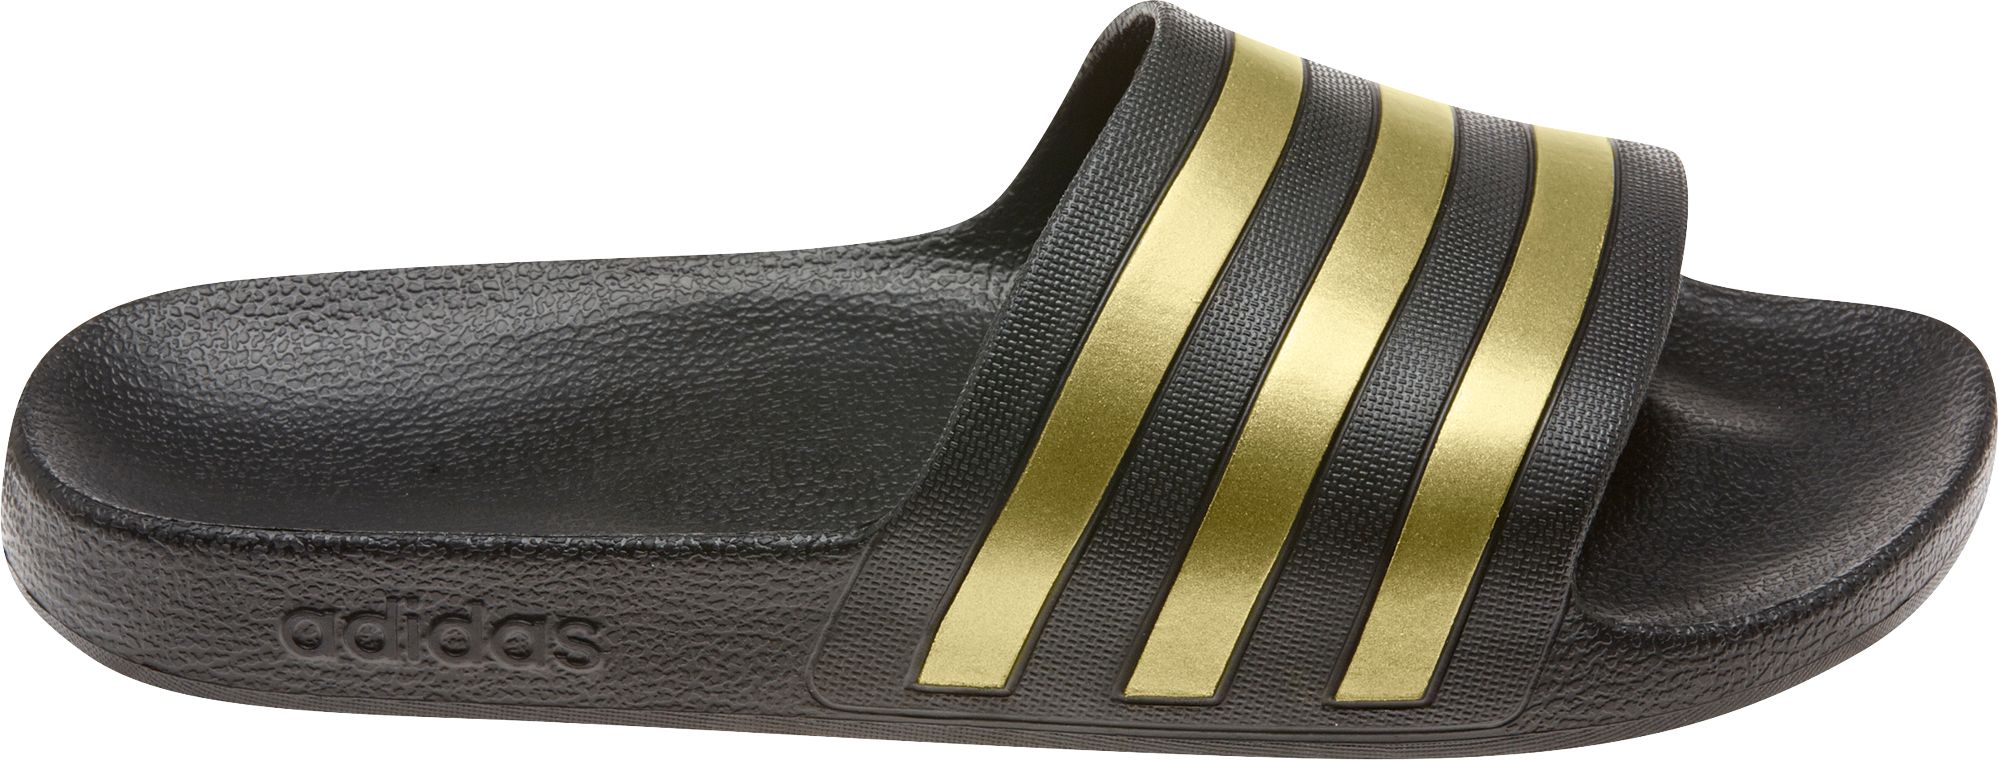 adidas slides womens black and gold